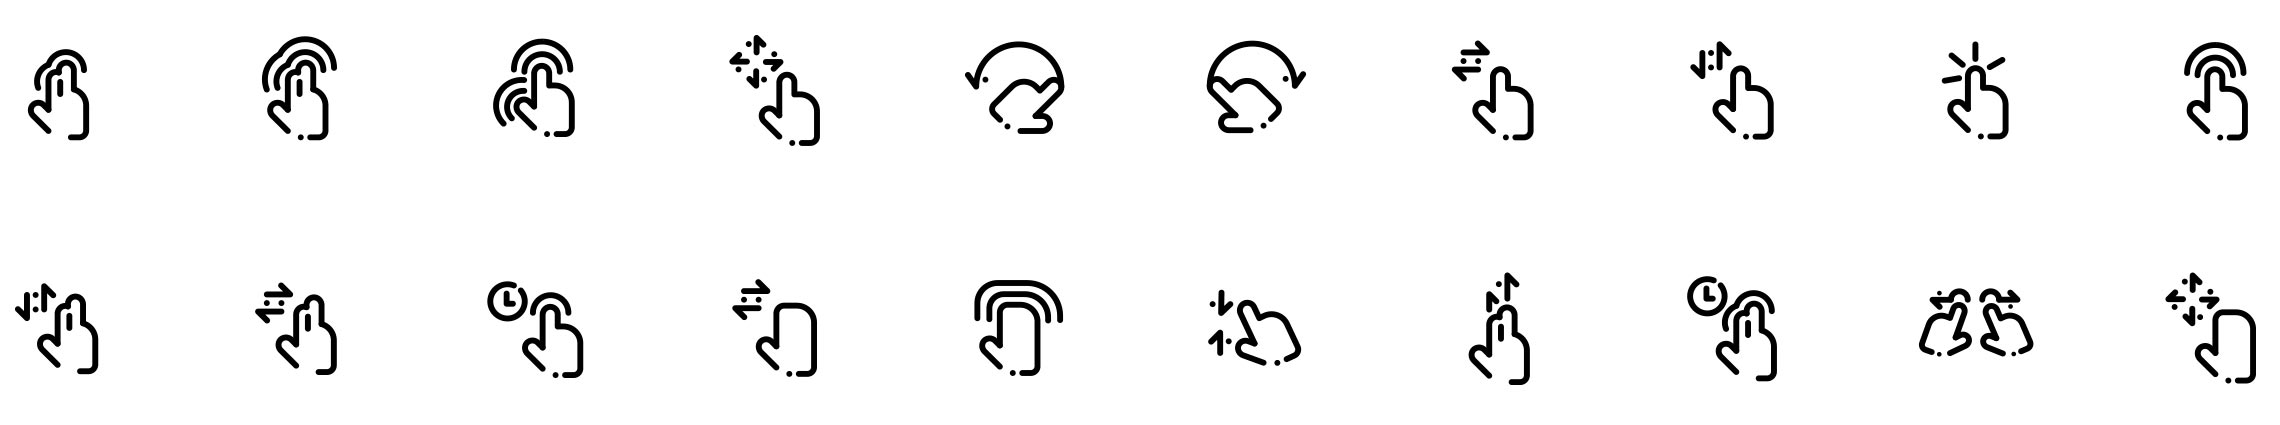 touch-gestures-icons-set-preview